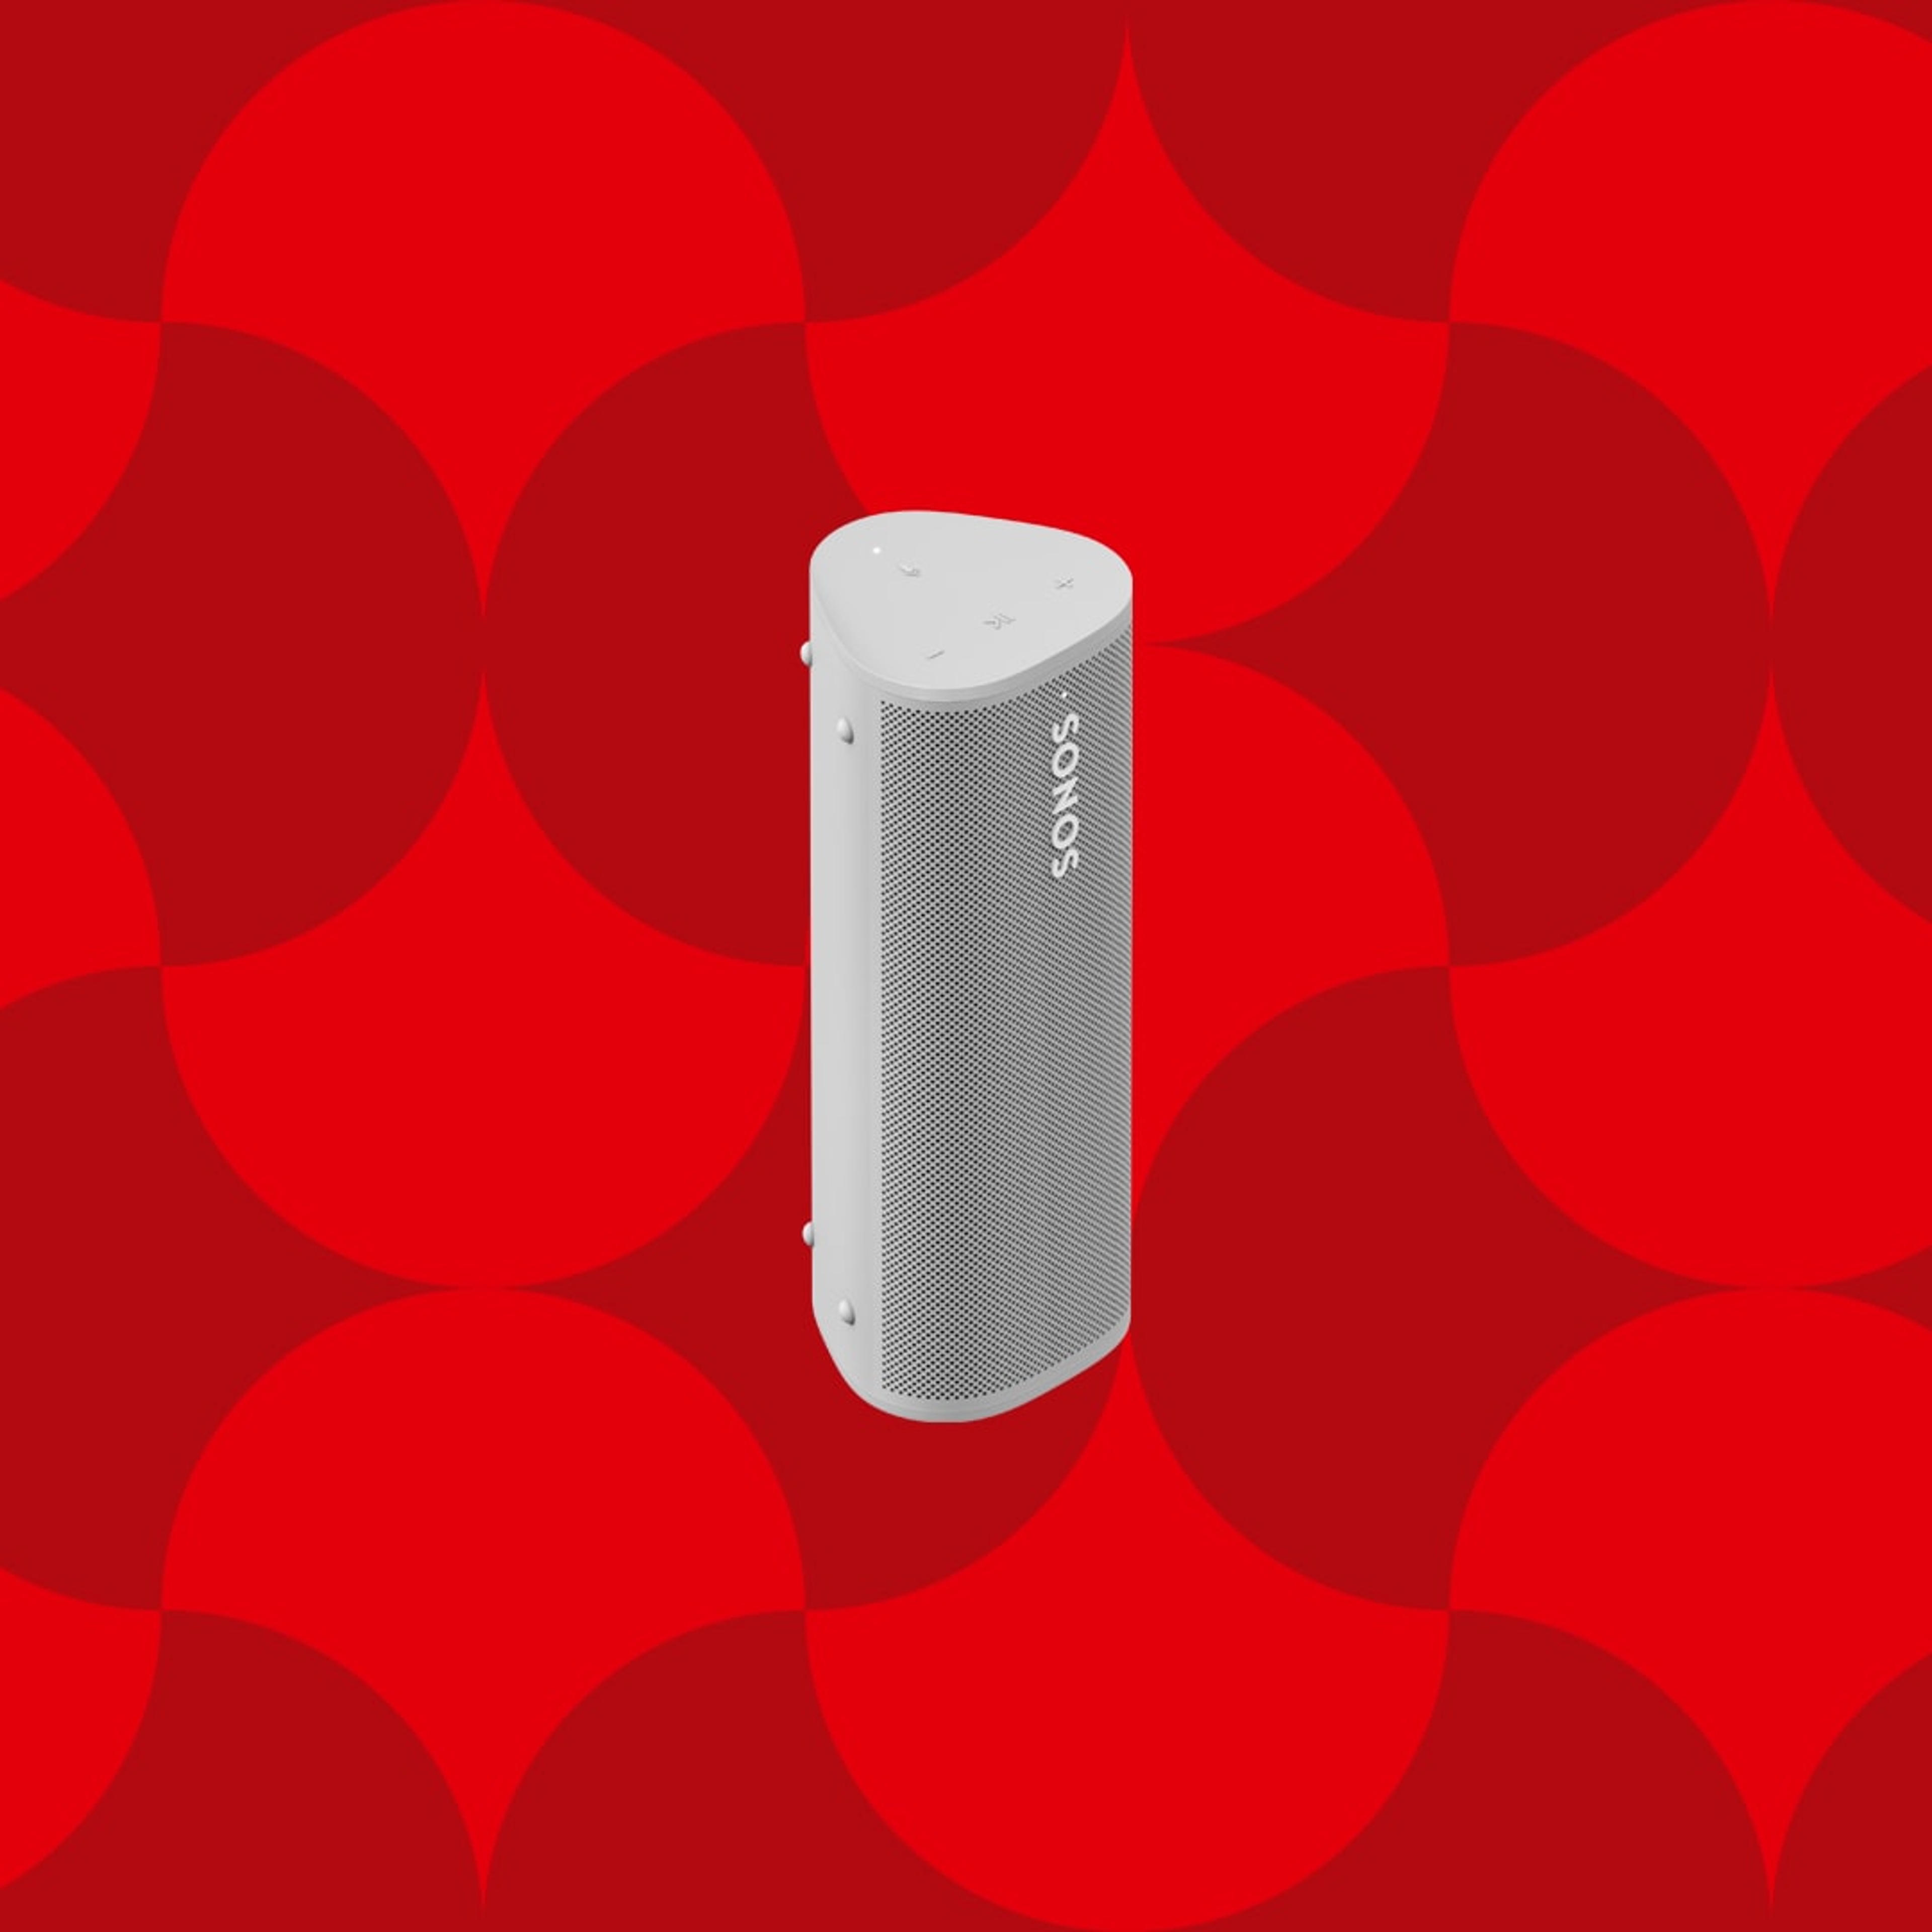 Image of a white Sonos Roam portable speaker on a red graphic holiday background